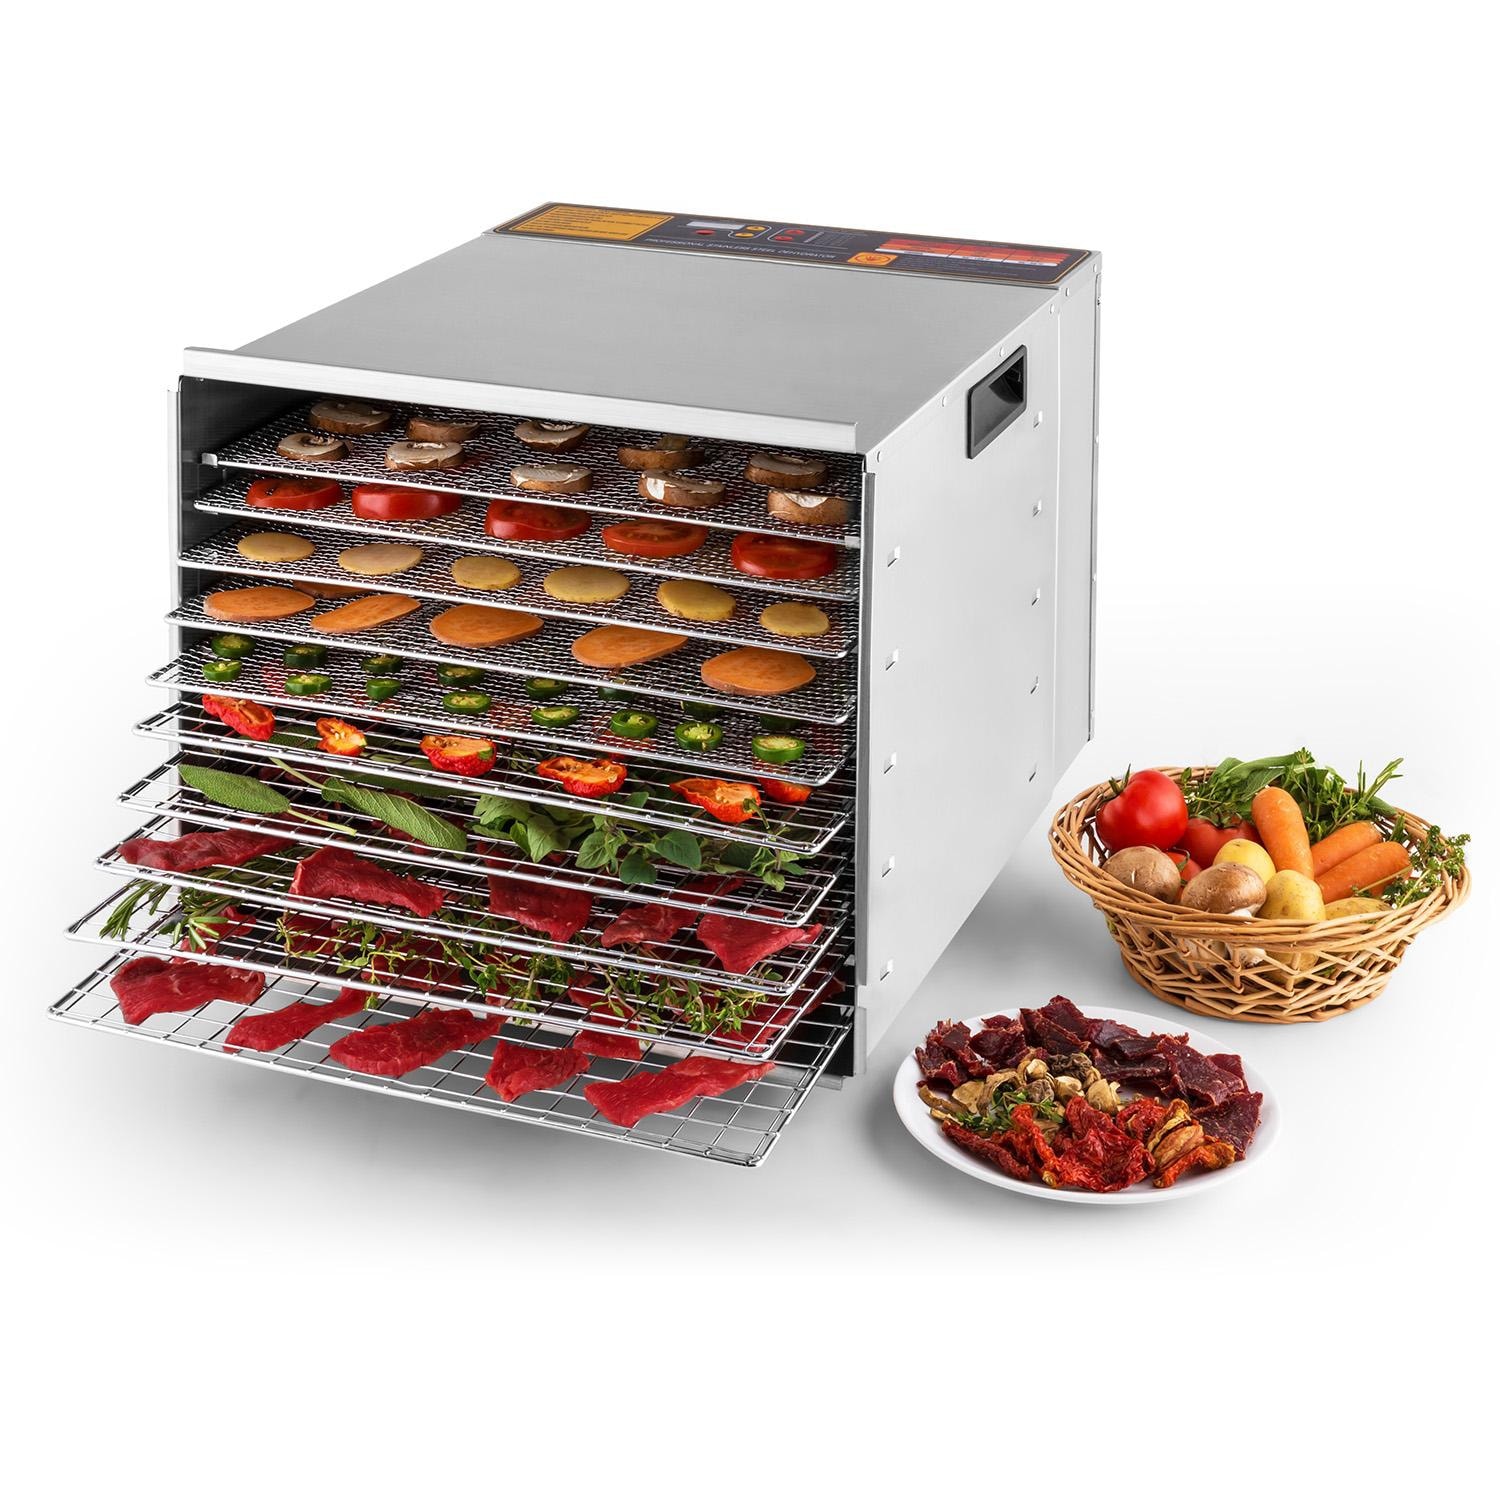 D-20 Digital Touch Screen Food Dehydrator - The Sausage Maker